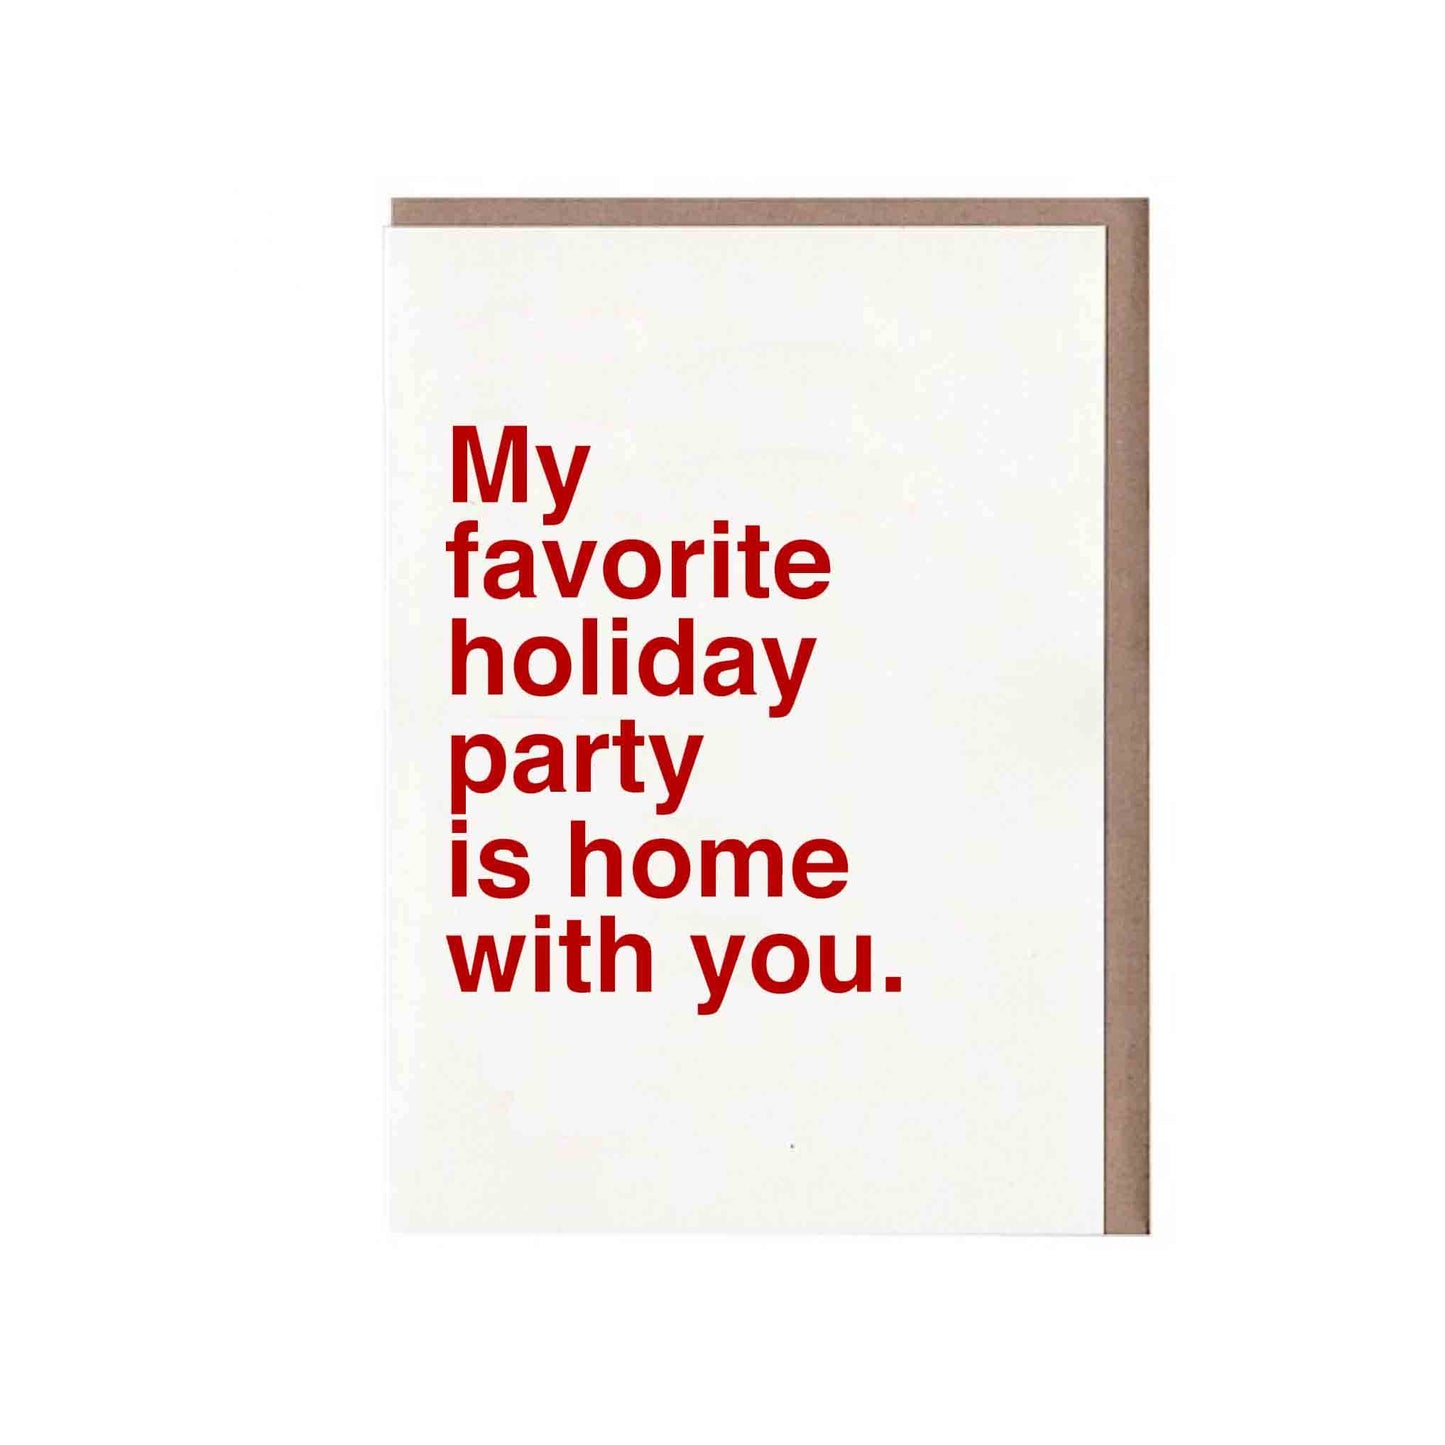 Sad Shop - My Favorite Holiday Party Is Home With You